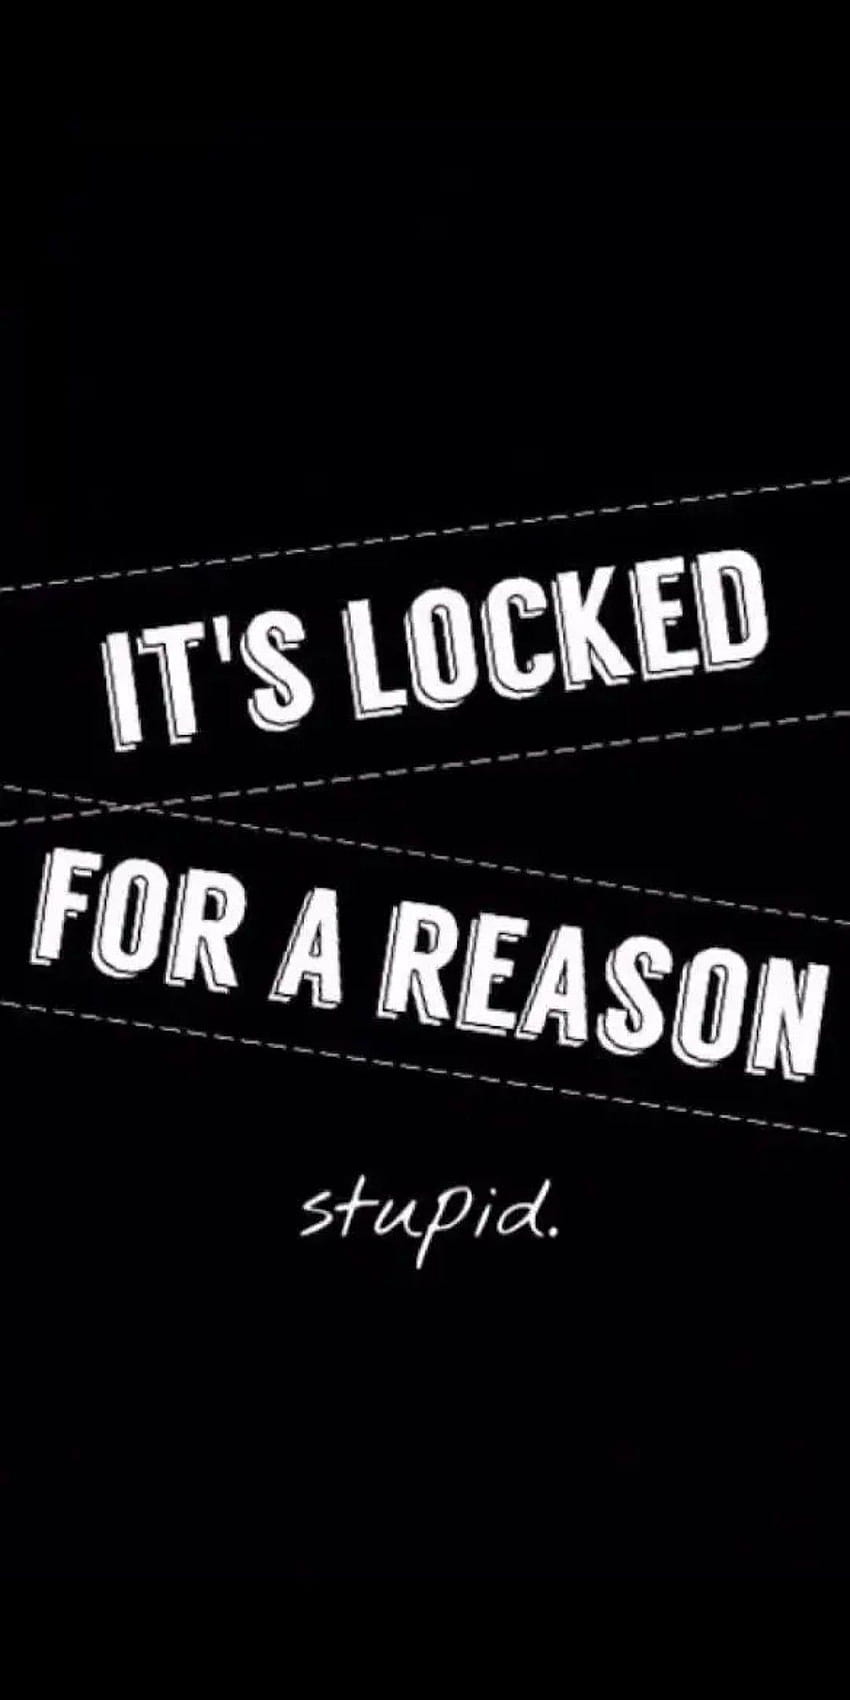 It's locked for a reason, stupid, im locked for a reason iphone HD phone wallpaper